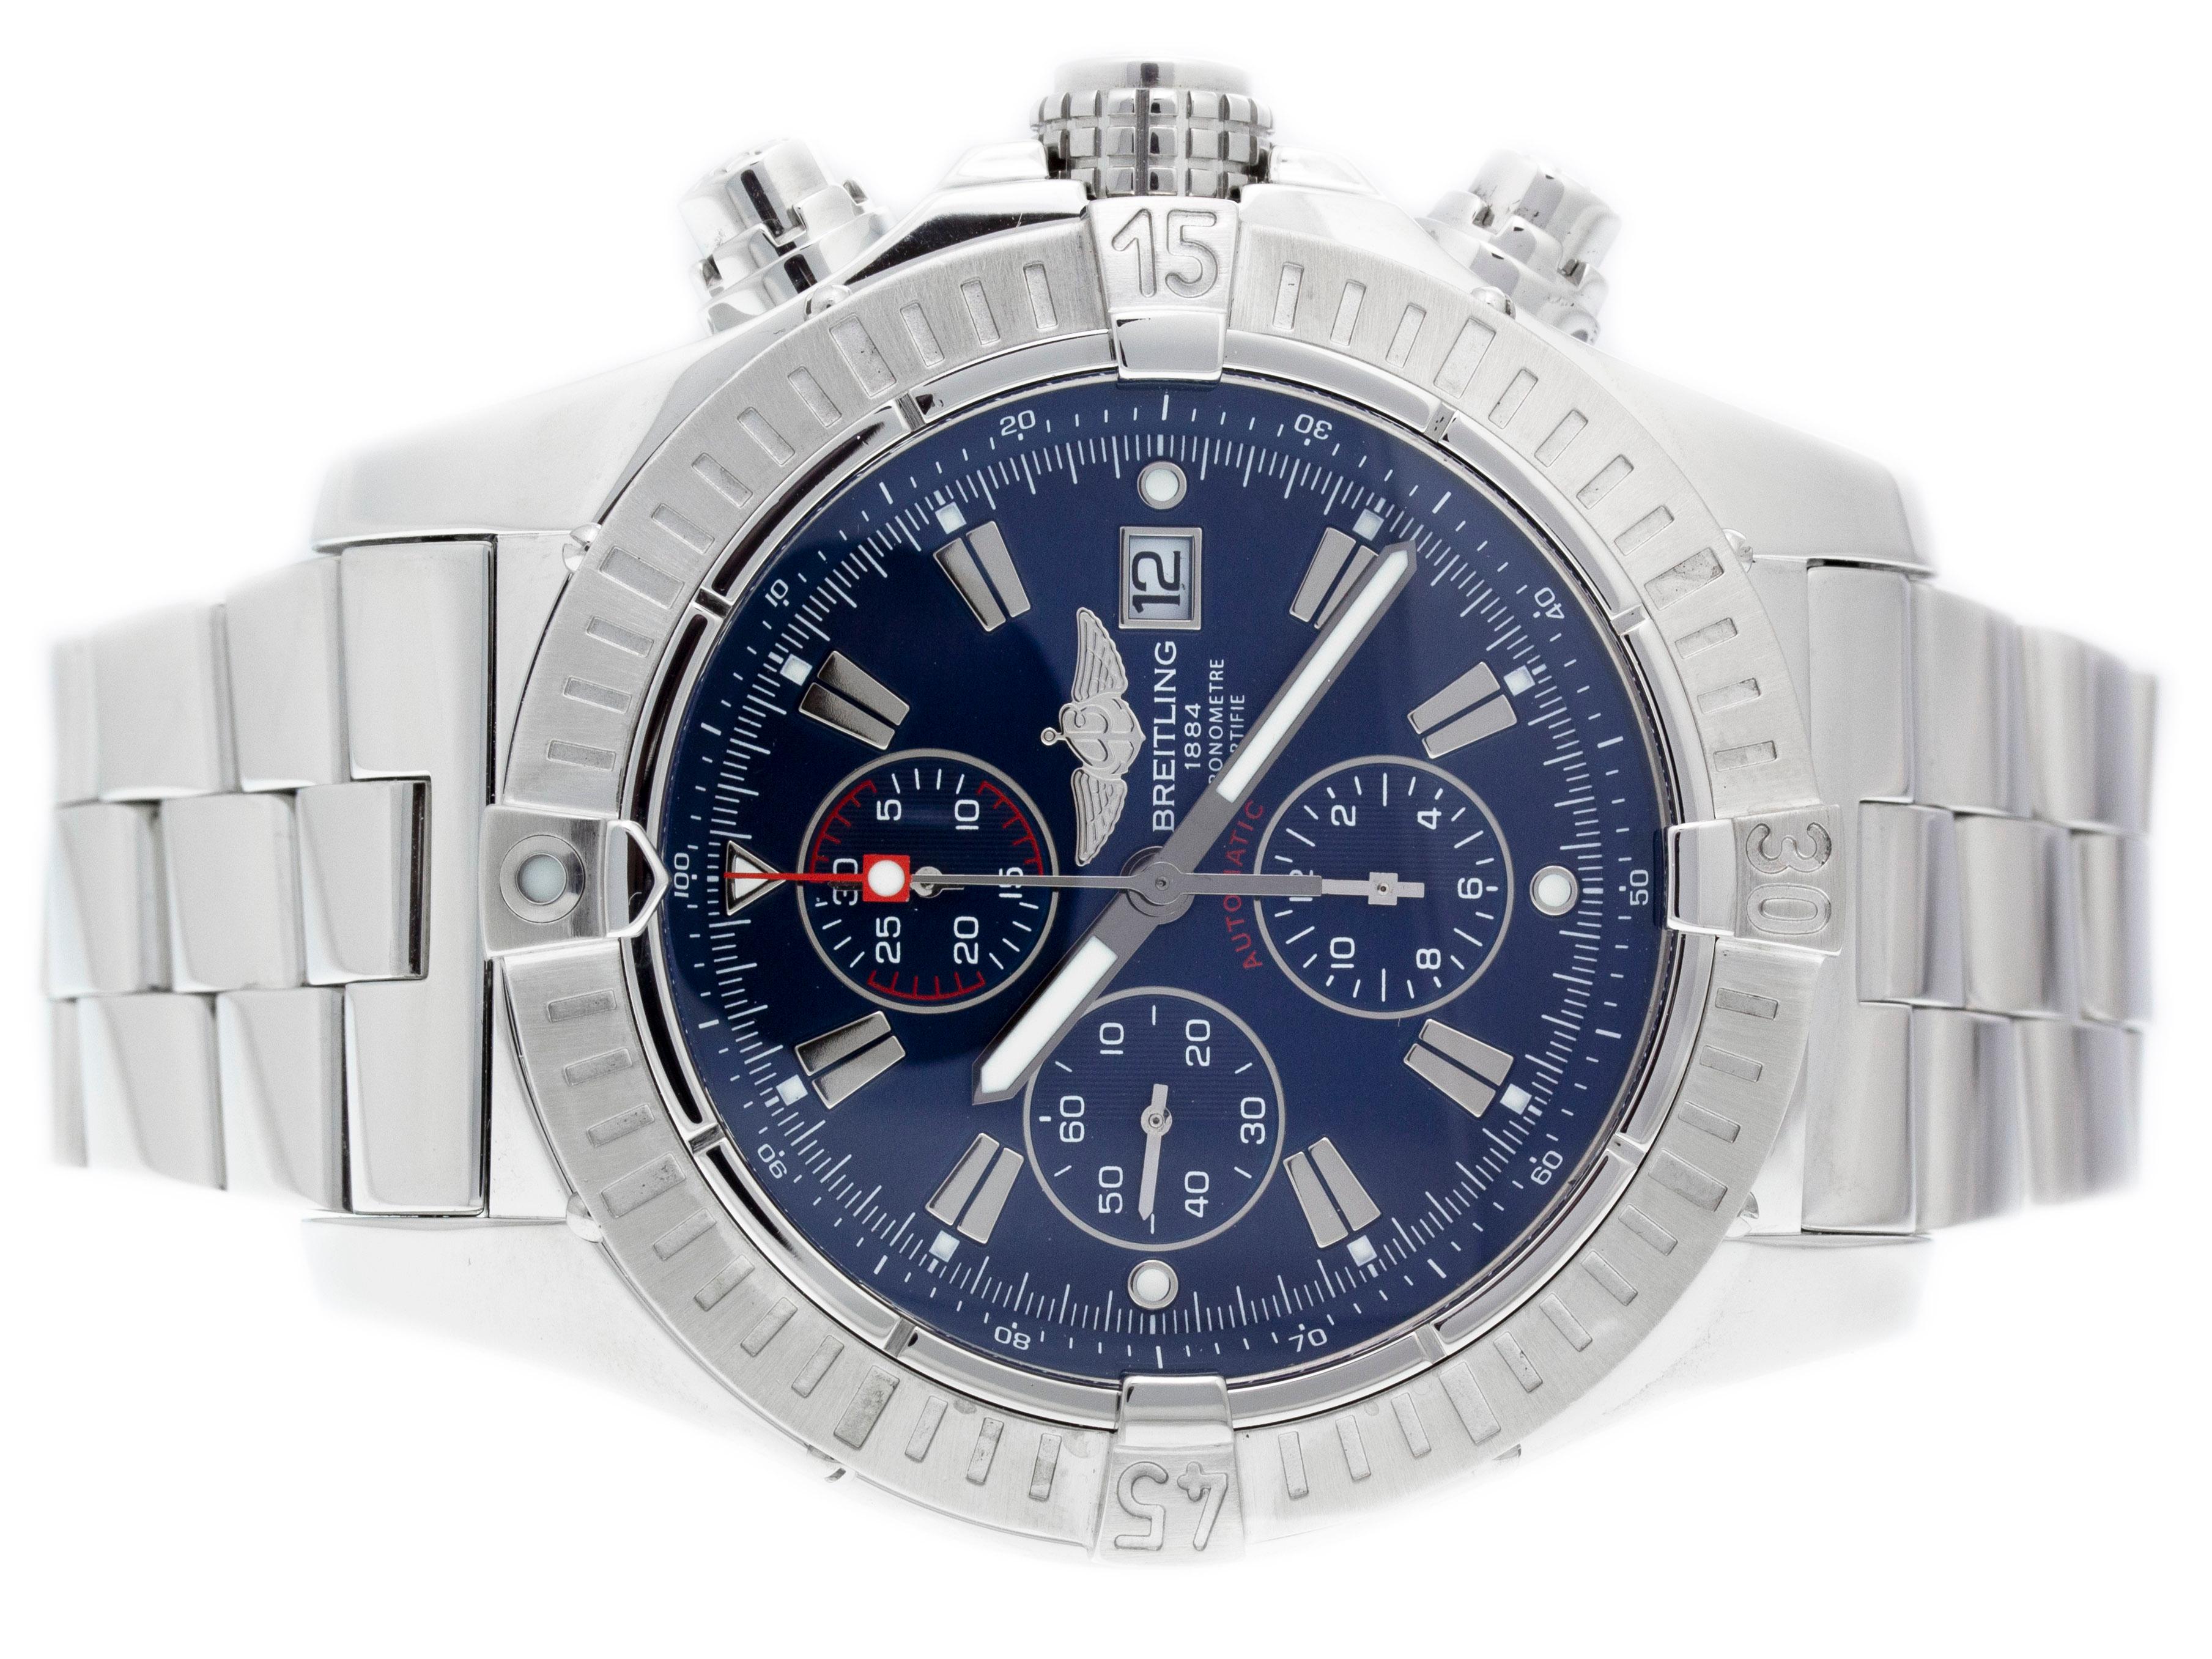 Brand	Breitling
Series	Aeromarine Super Avenger
Model	A1337011/C757
Gender	Men’s
Condition	Excellent Condition Pre-owned, Faint Scratches & Dings on Bezel & Case
Material	Stainless Steel
Finish	Brushed & Polished
Caseback	Stainless